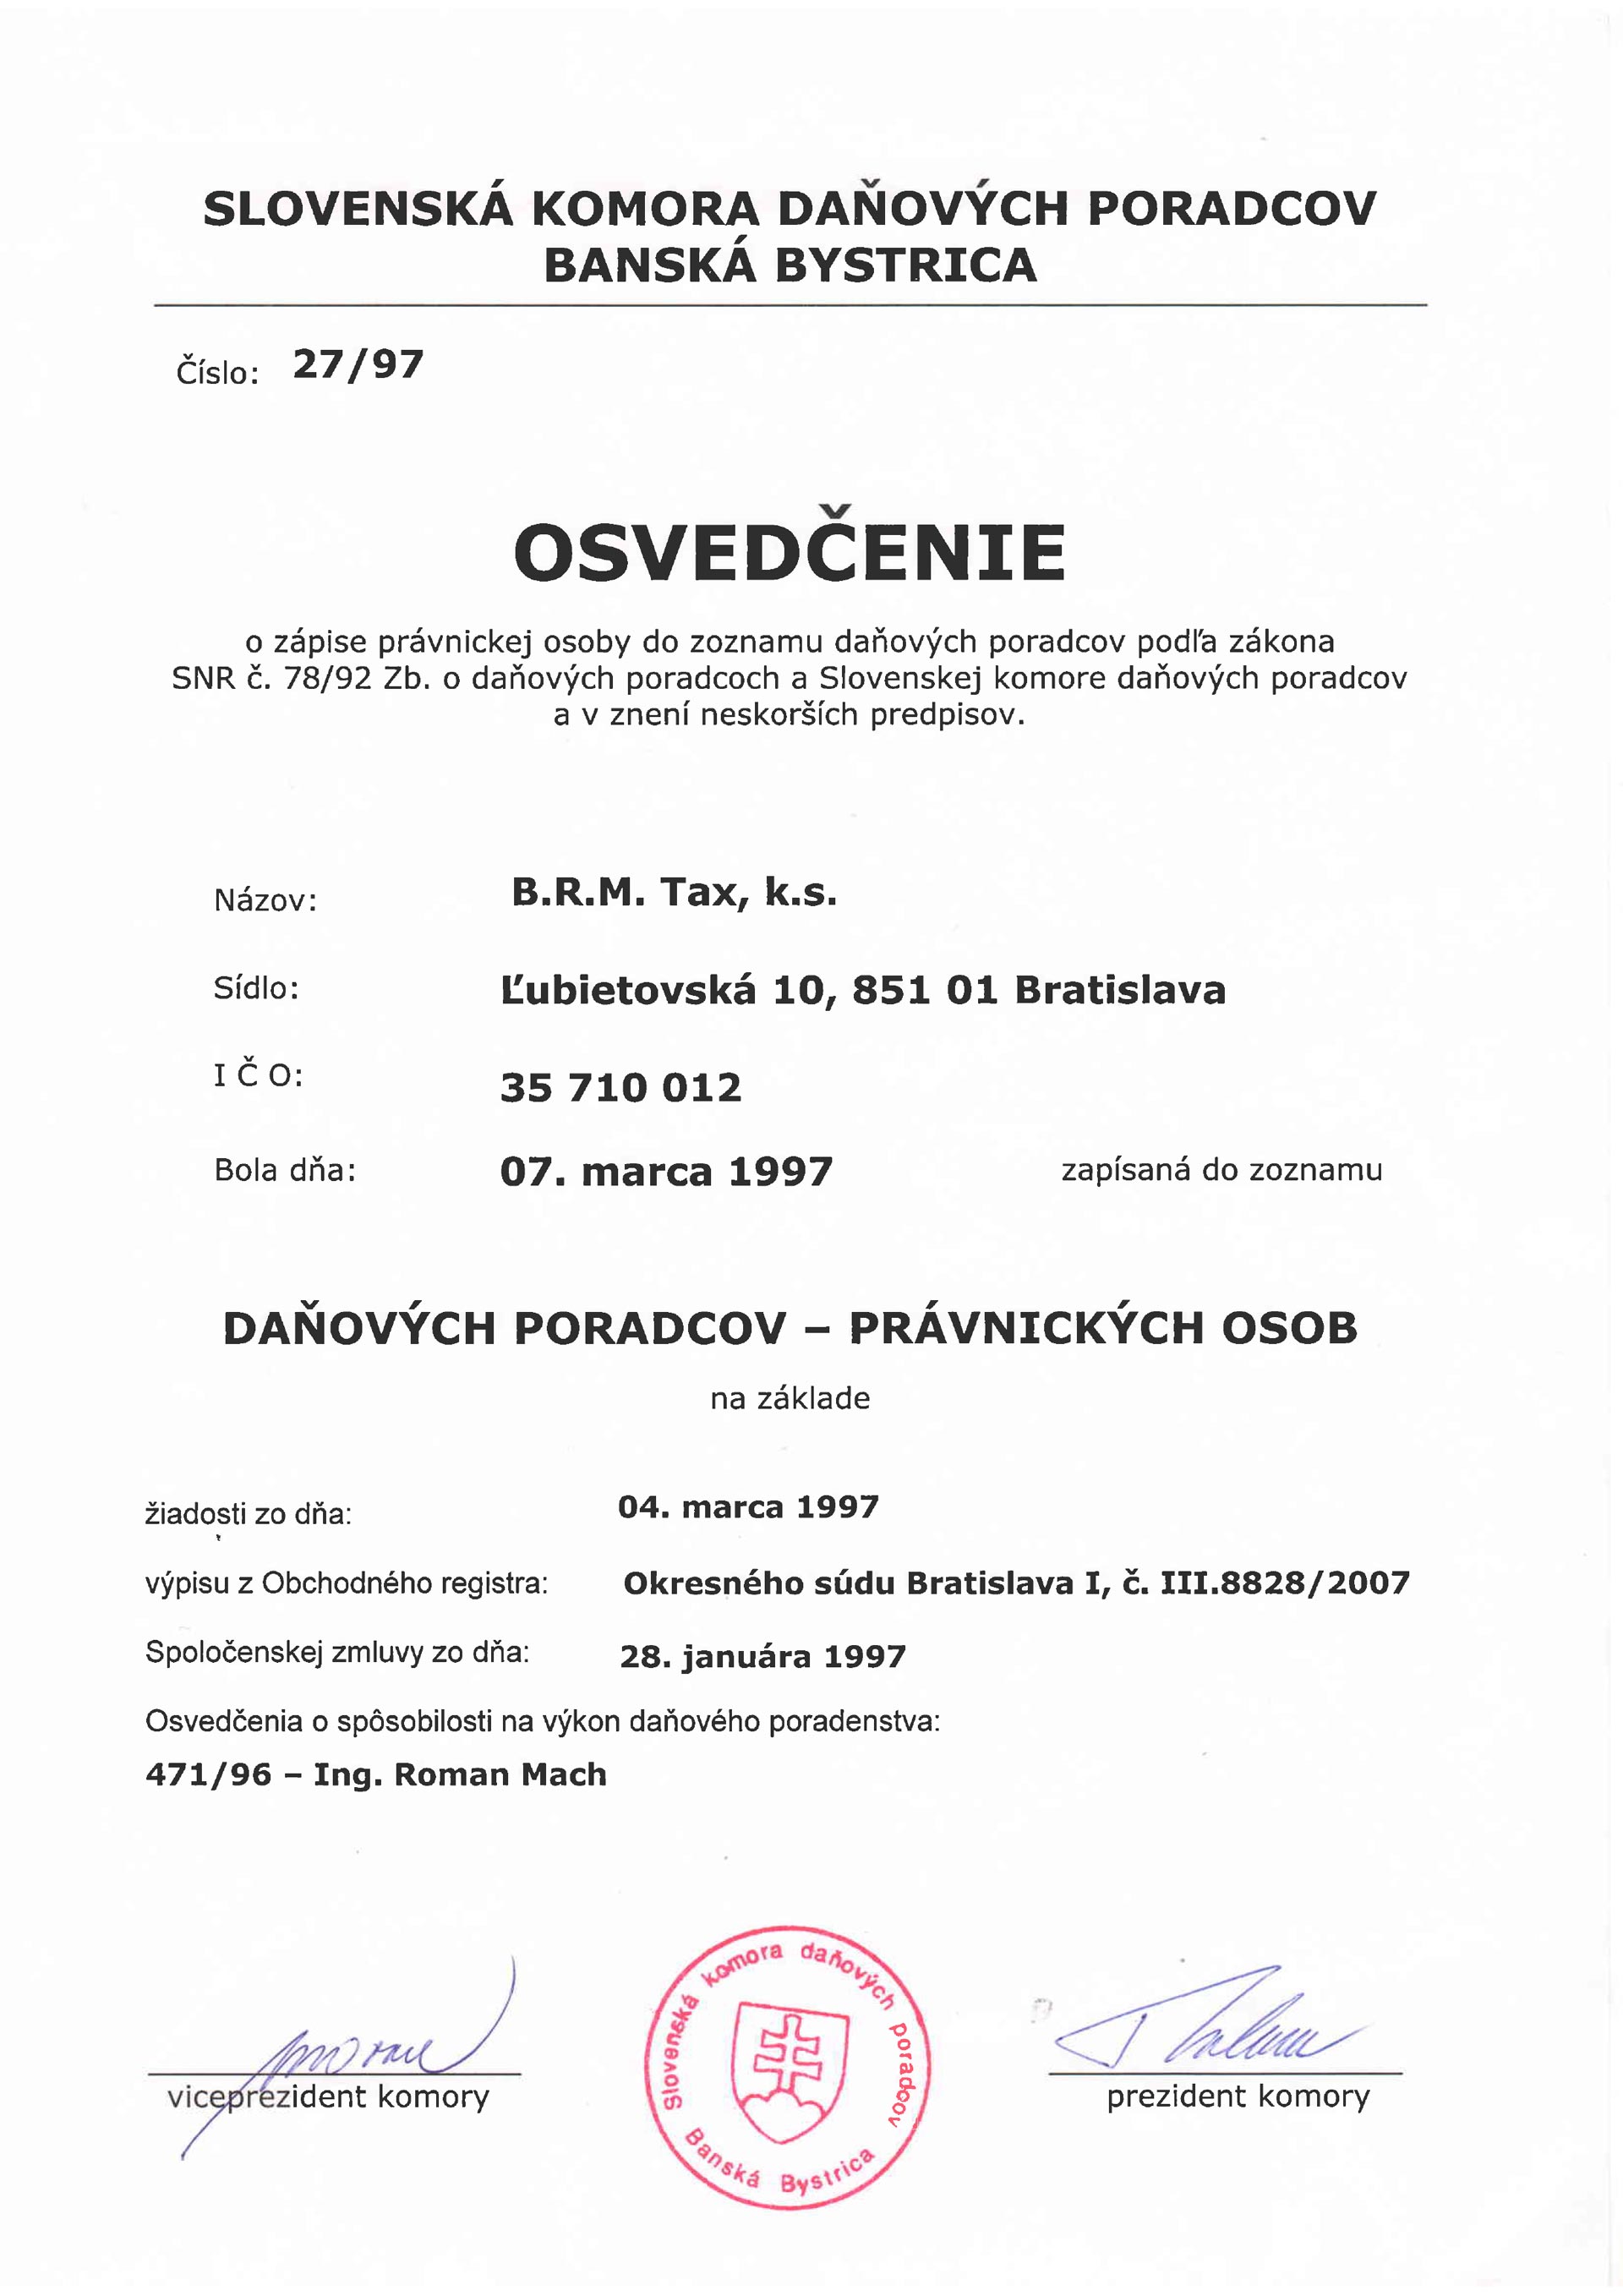 TAX-Osvedcenie-SKDP-featured